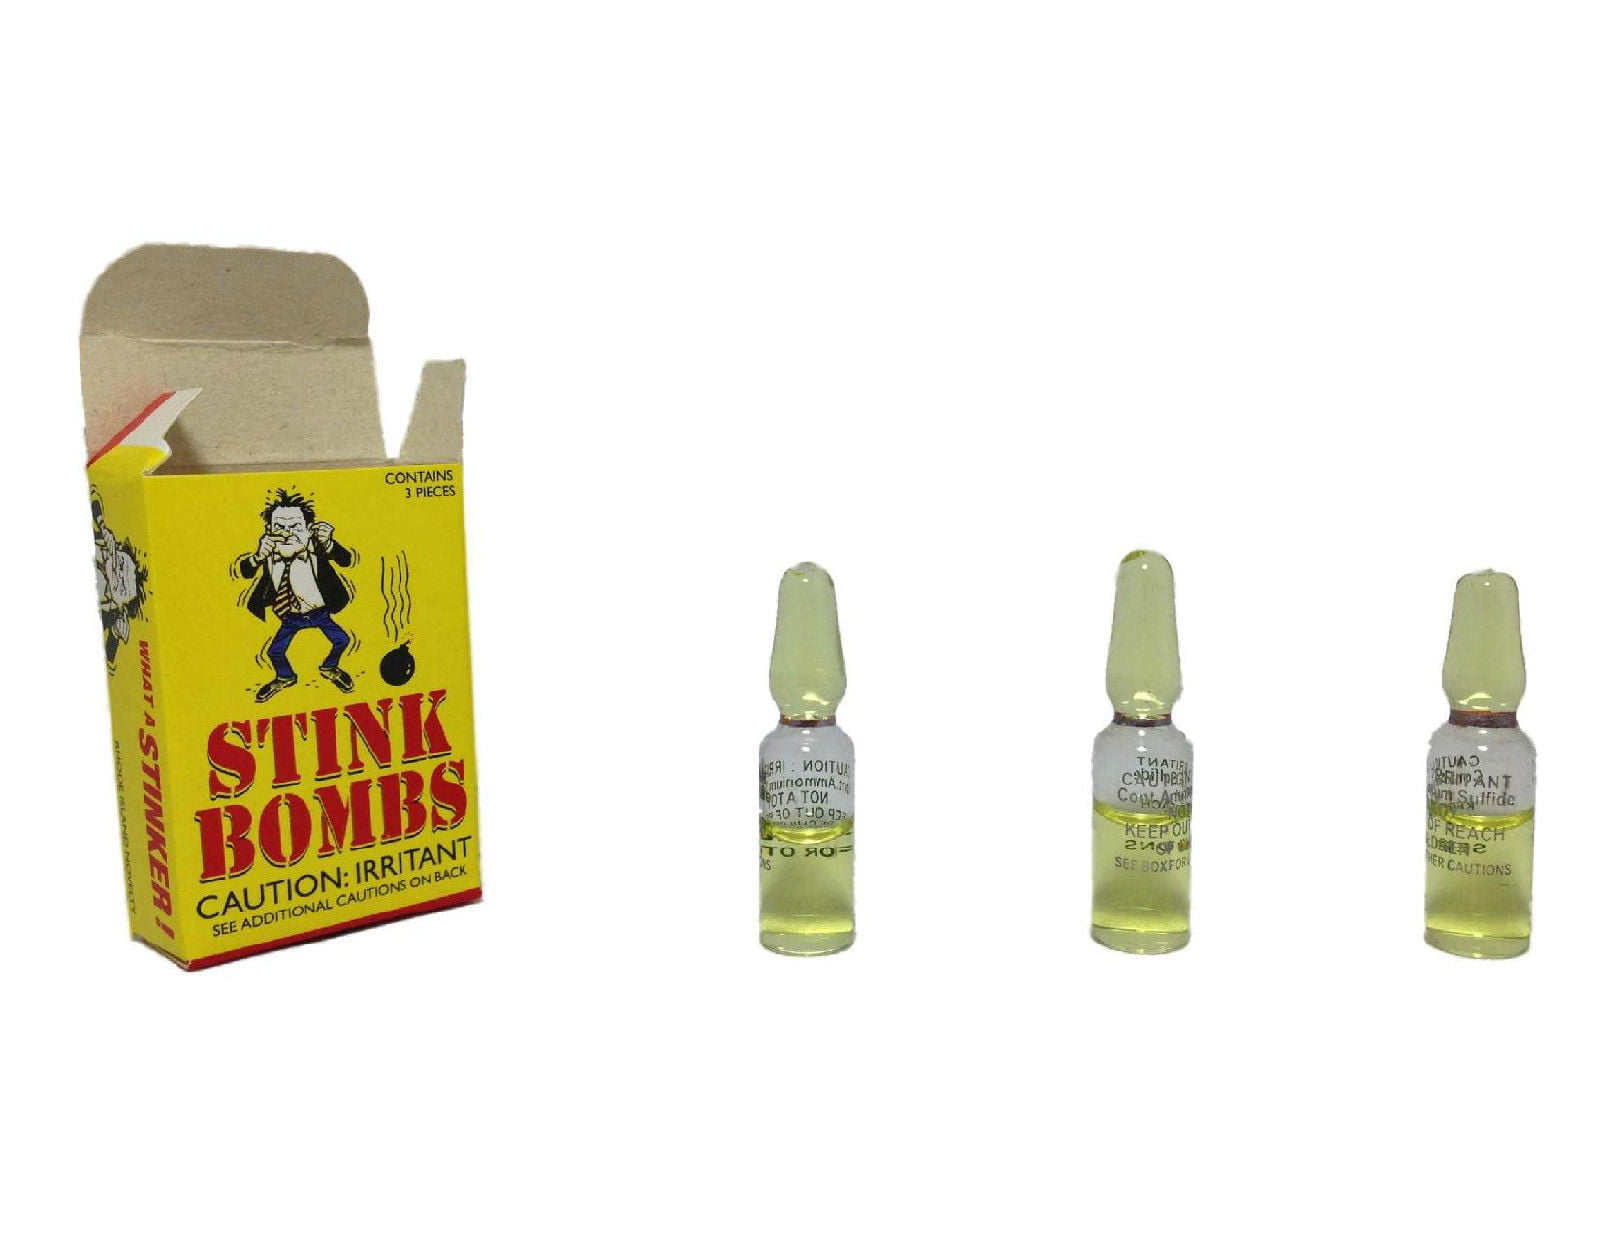 1 CASE OF 36 STINK BOMBS + 3 FART BOMB BAGS ~ COMBO SET